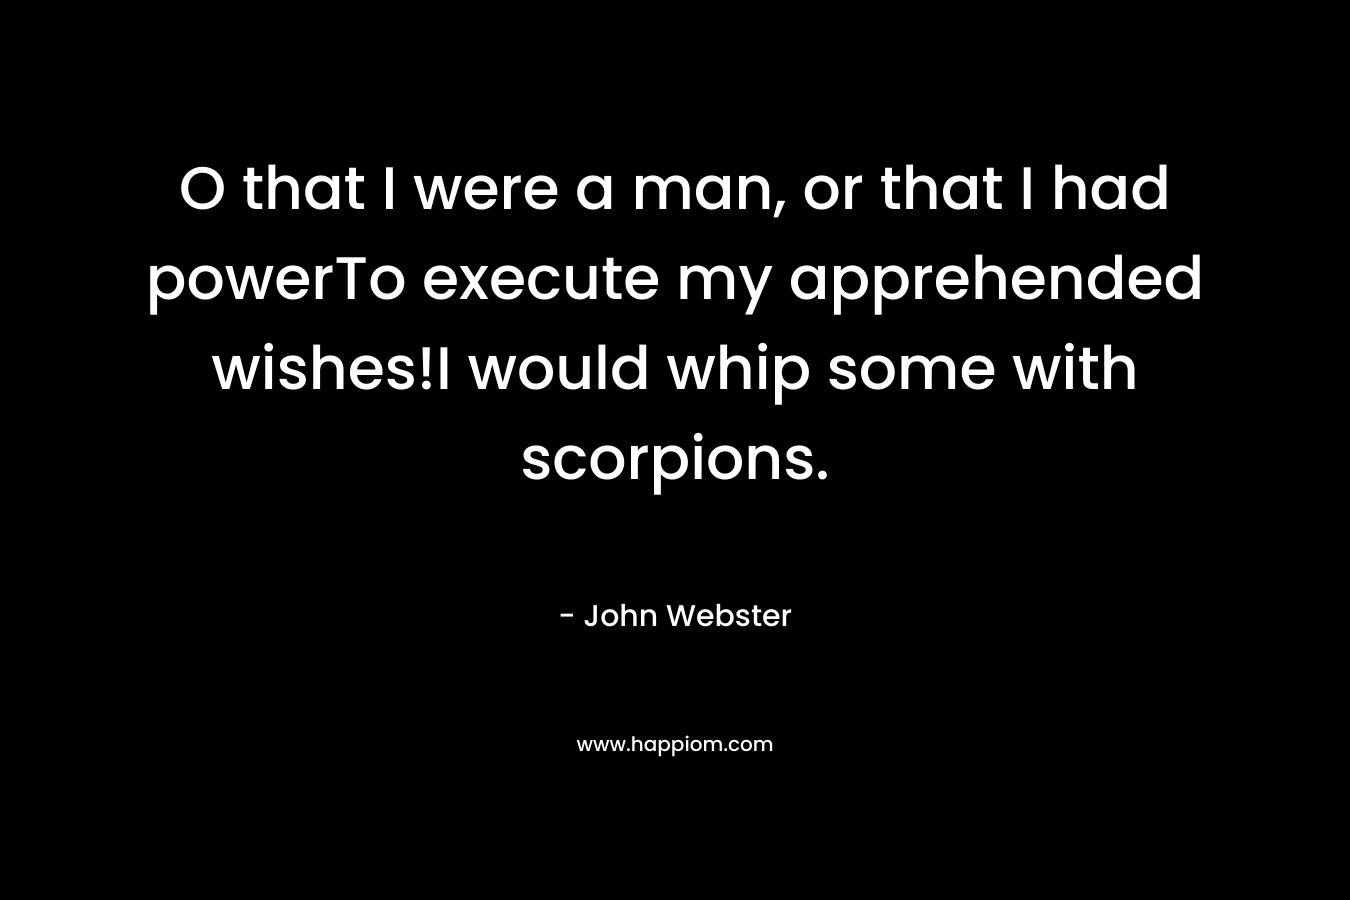 O that I were a man, or that I had powerTo execute my apprehended wishes!I would whip some with scorpions.